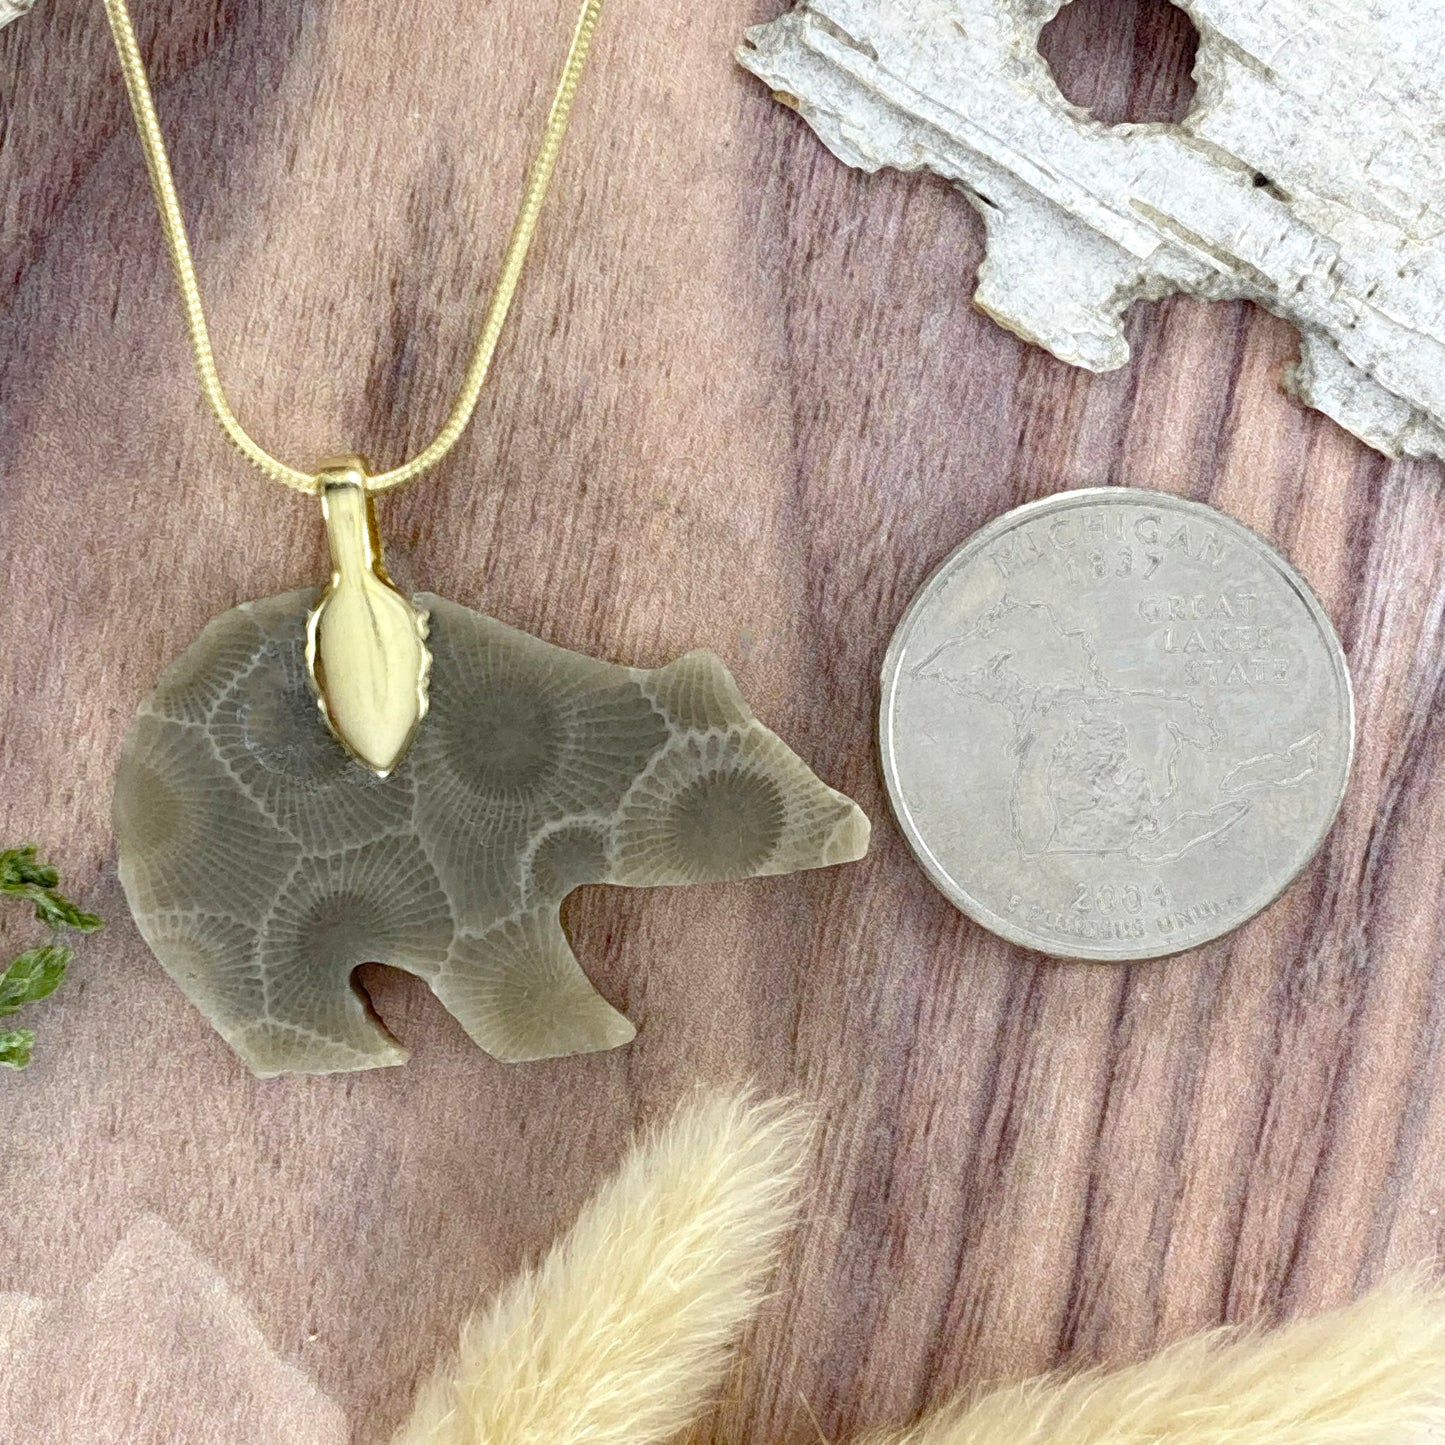 Petoskey Stone Bear Pendant Necklace Back View - Stone Treasures by the Lake